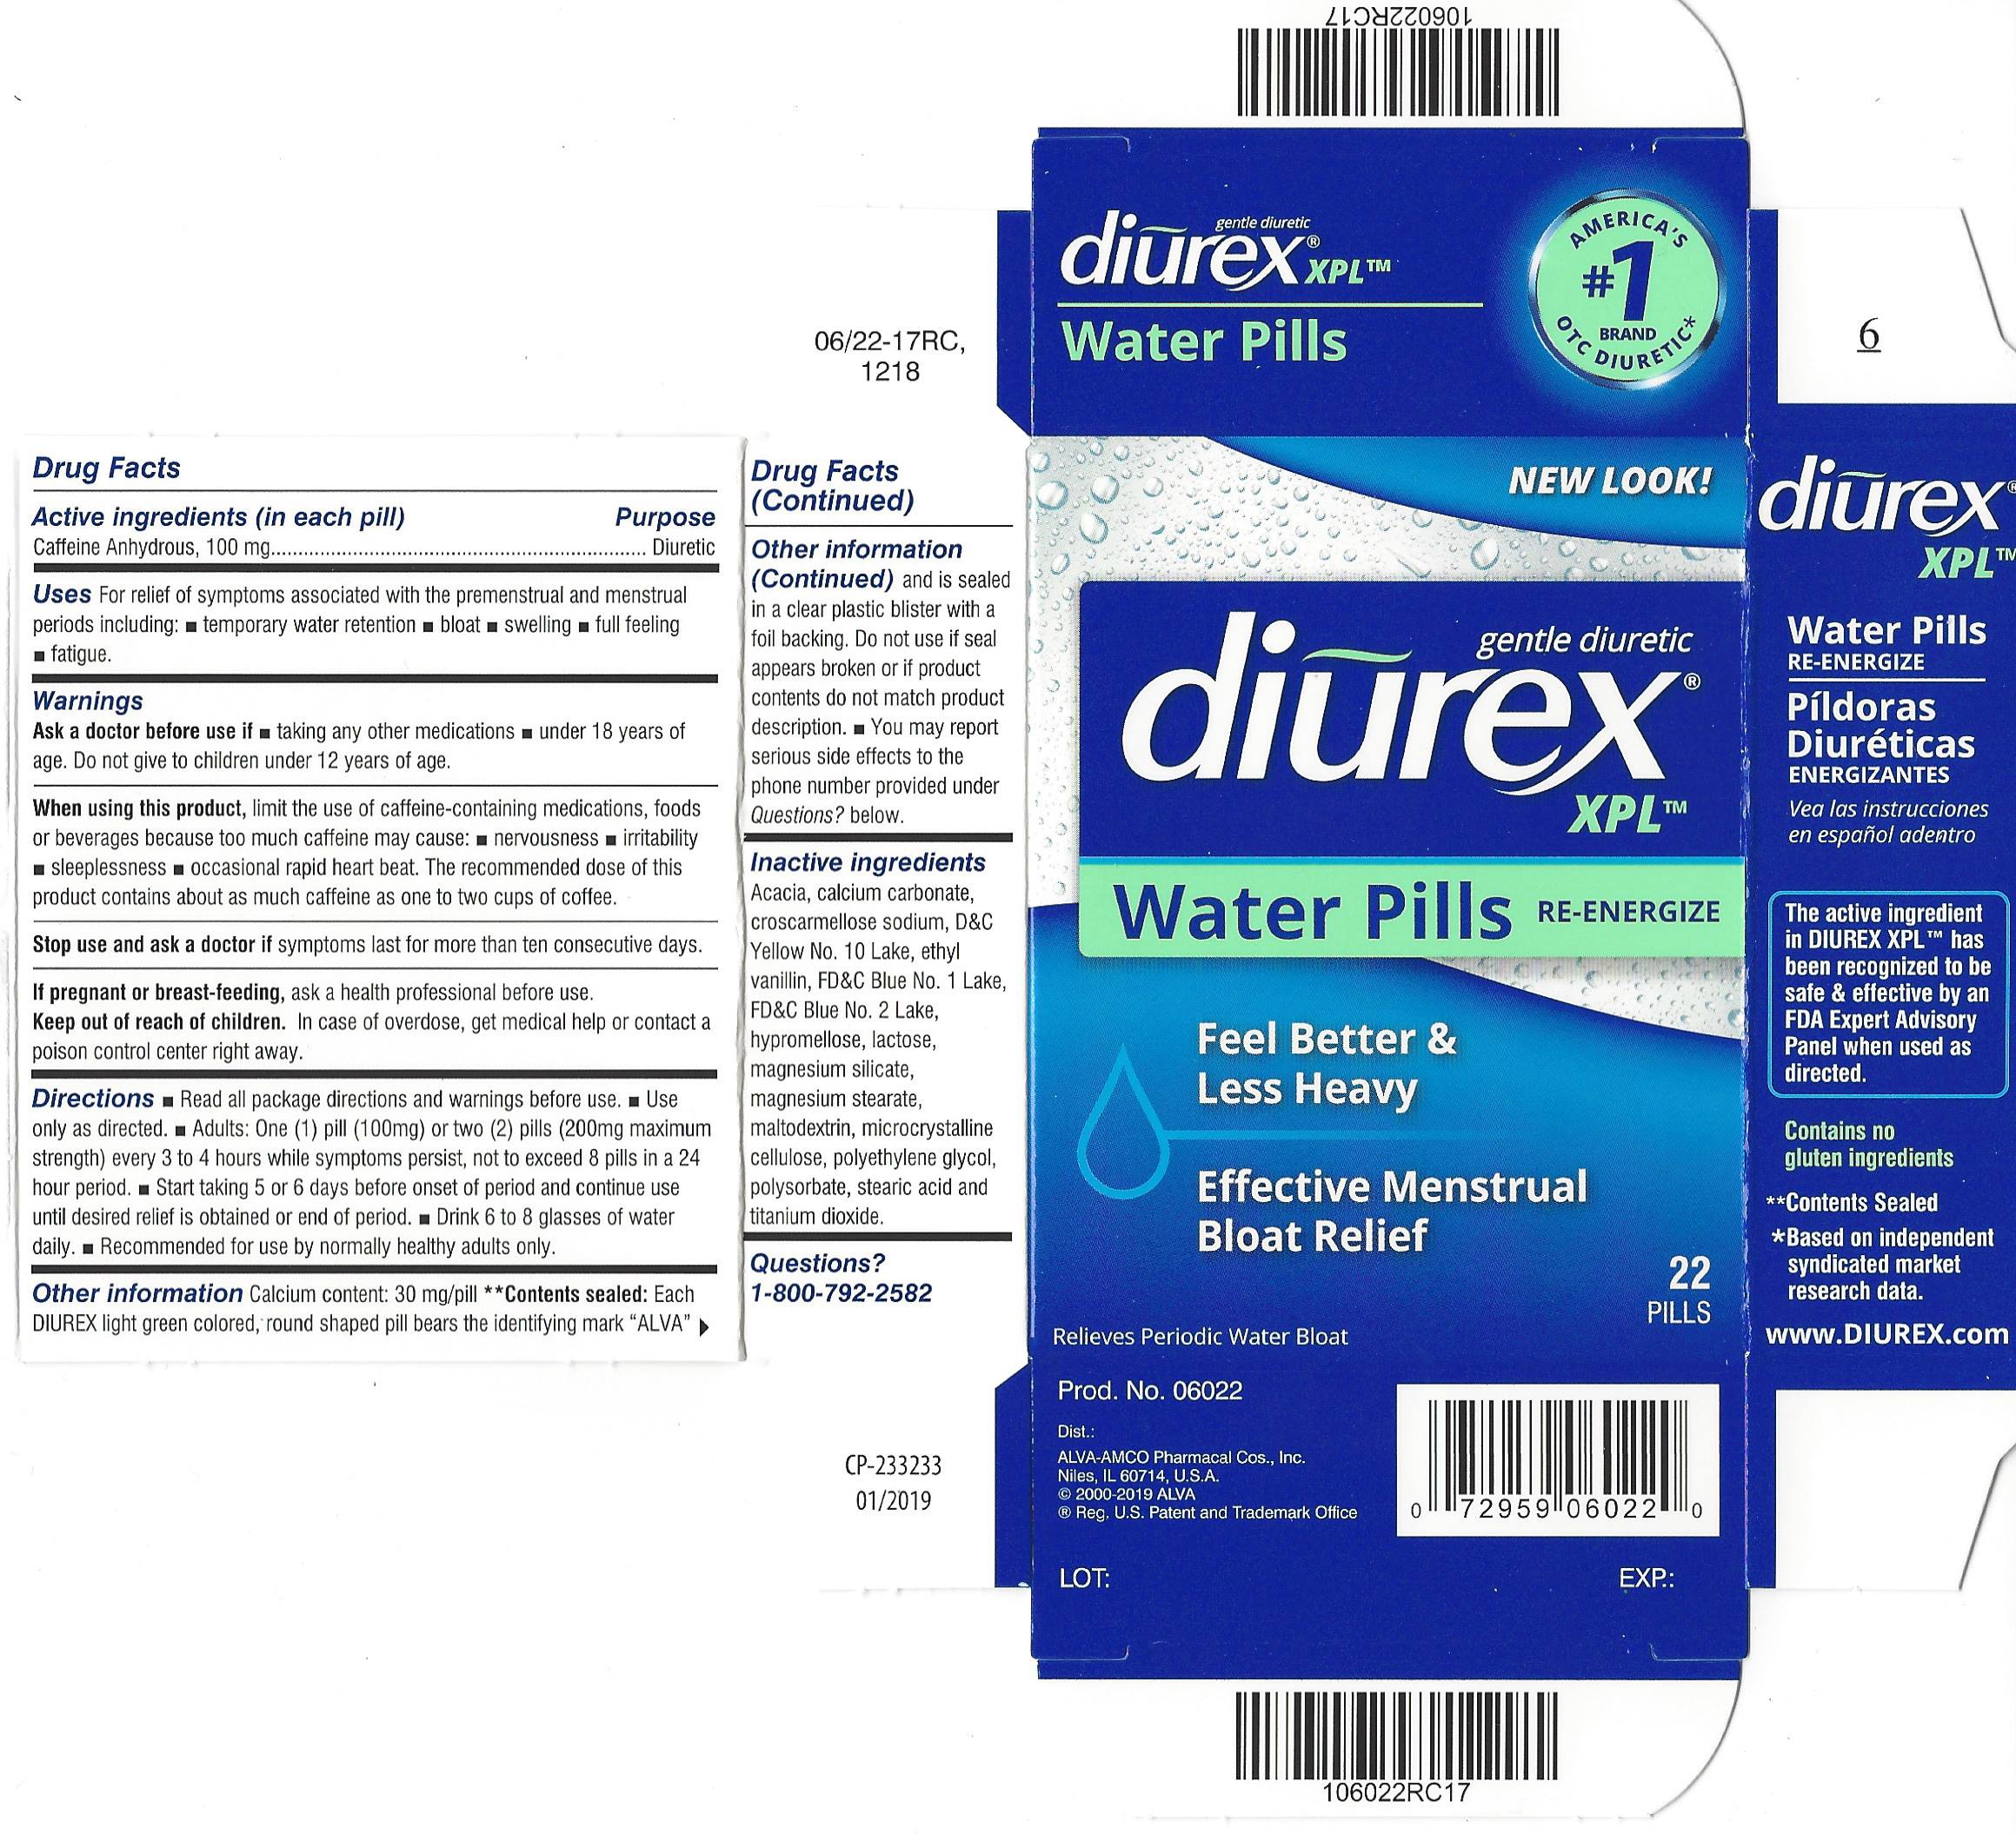 what are the side effects of diurex water pills